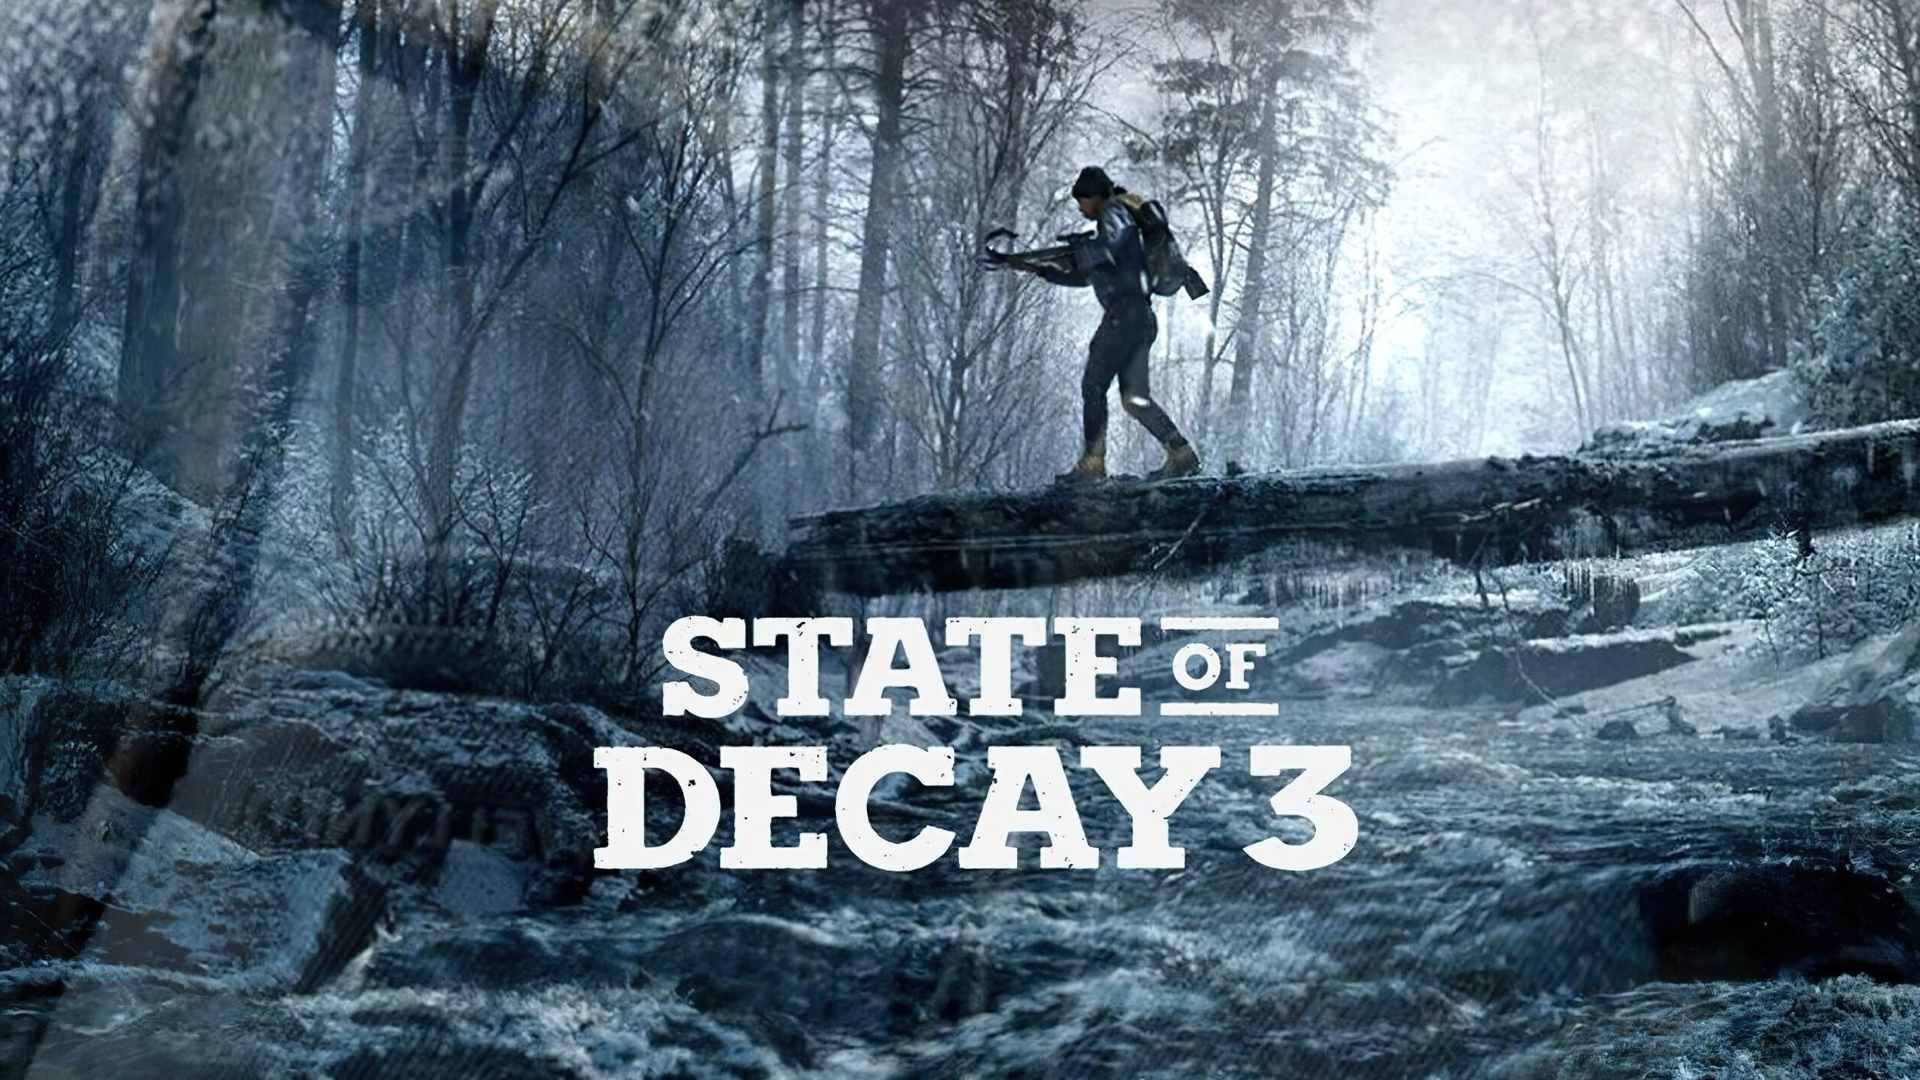 state of decay 3 mmo